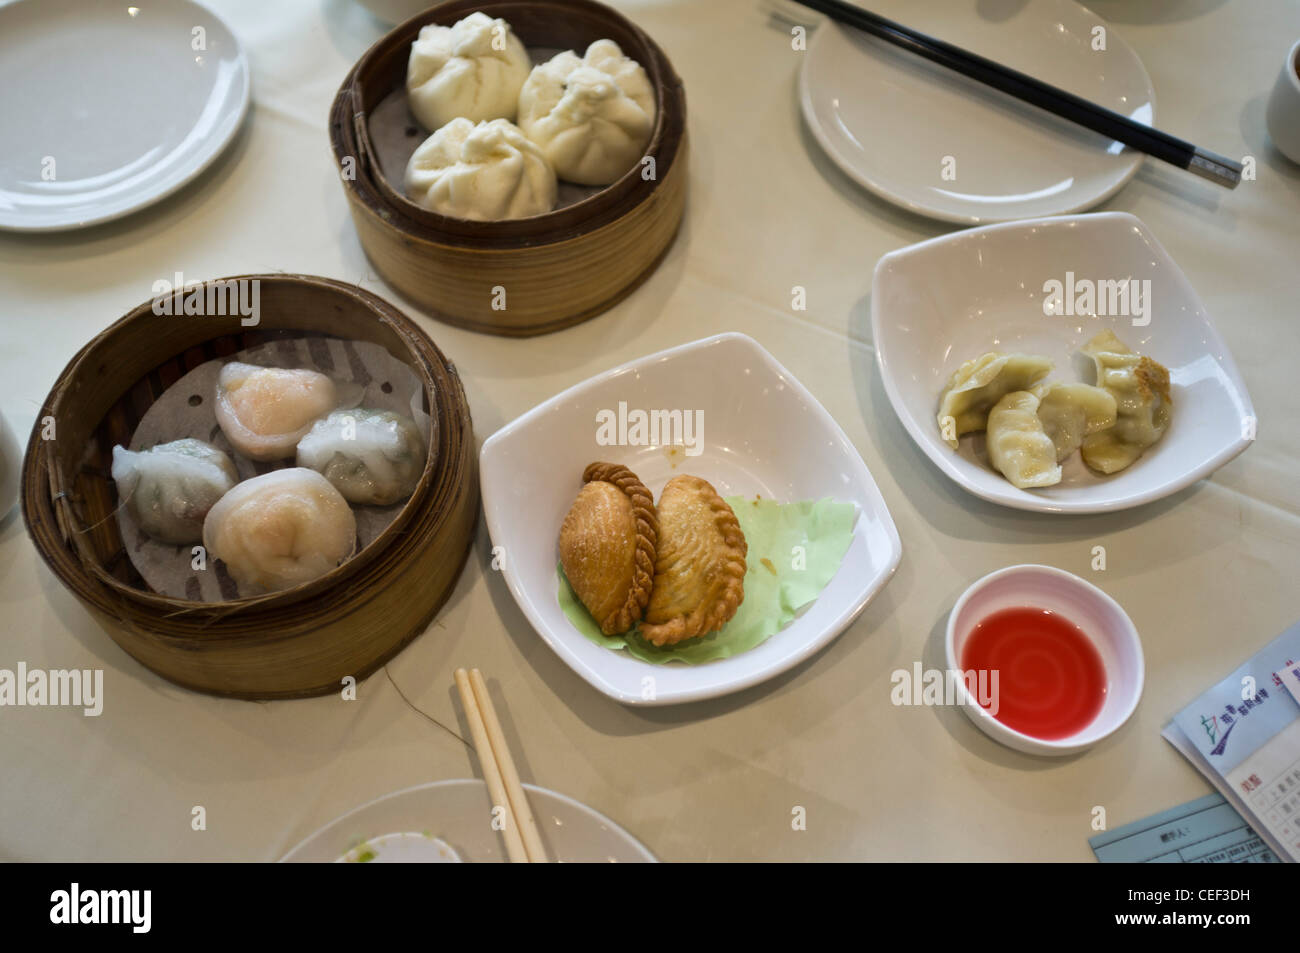 dh Chinese cantonese dim sum FOOD HONG KONG Dishes bamboo steamers table setting china breakfast restaurant with lunch Stock Photo